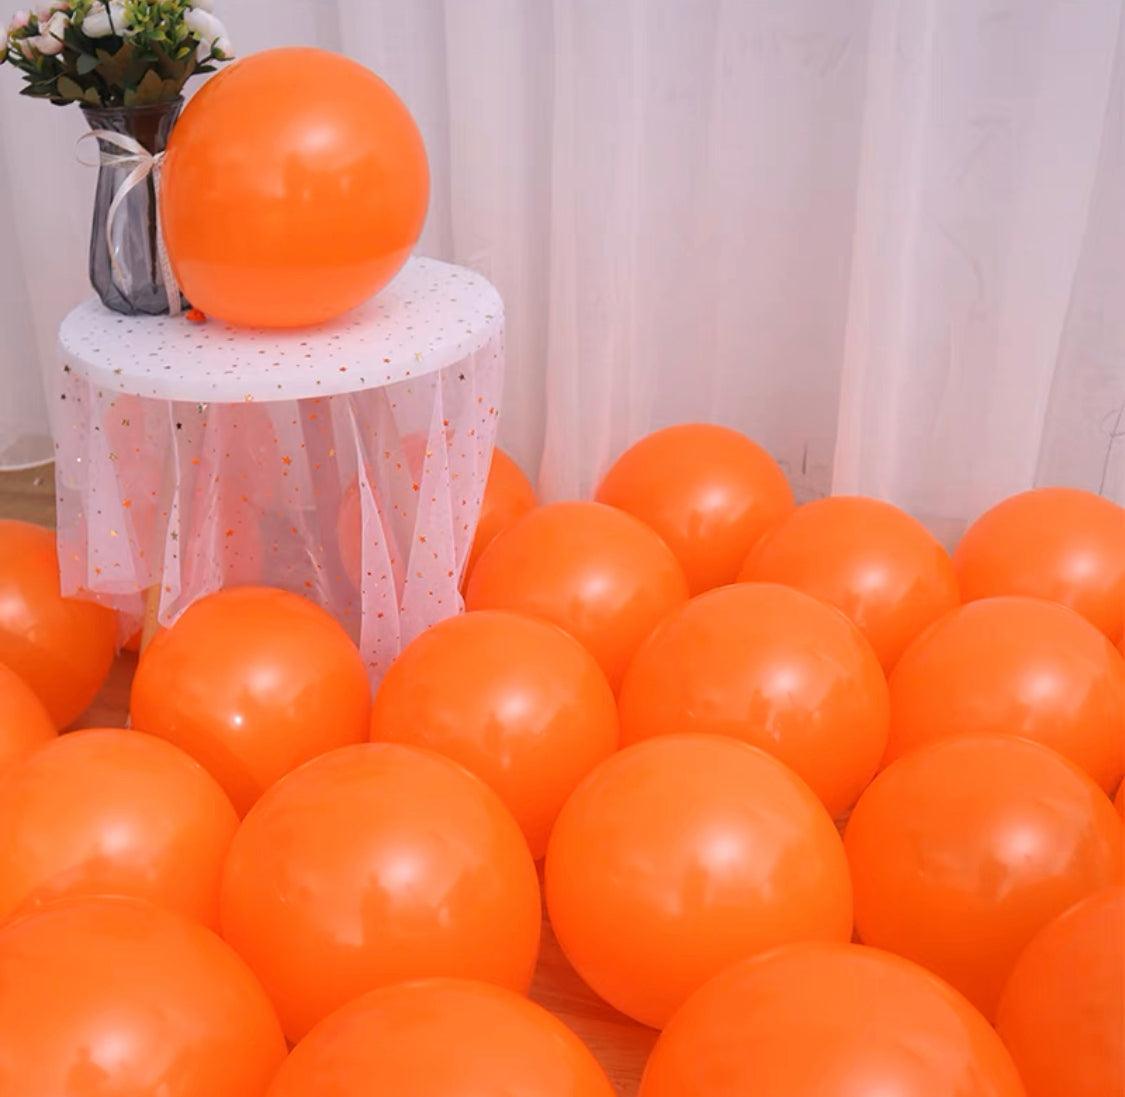 Global Shipping (50 pack) 11 inch Orange Balloons high quality (Balloons only) - ONE UP BALLOONS